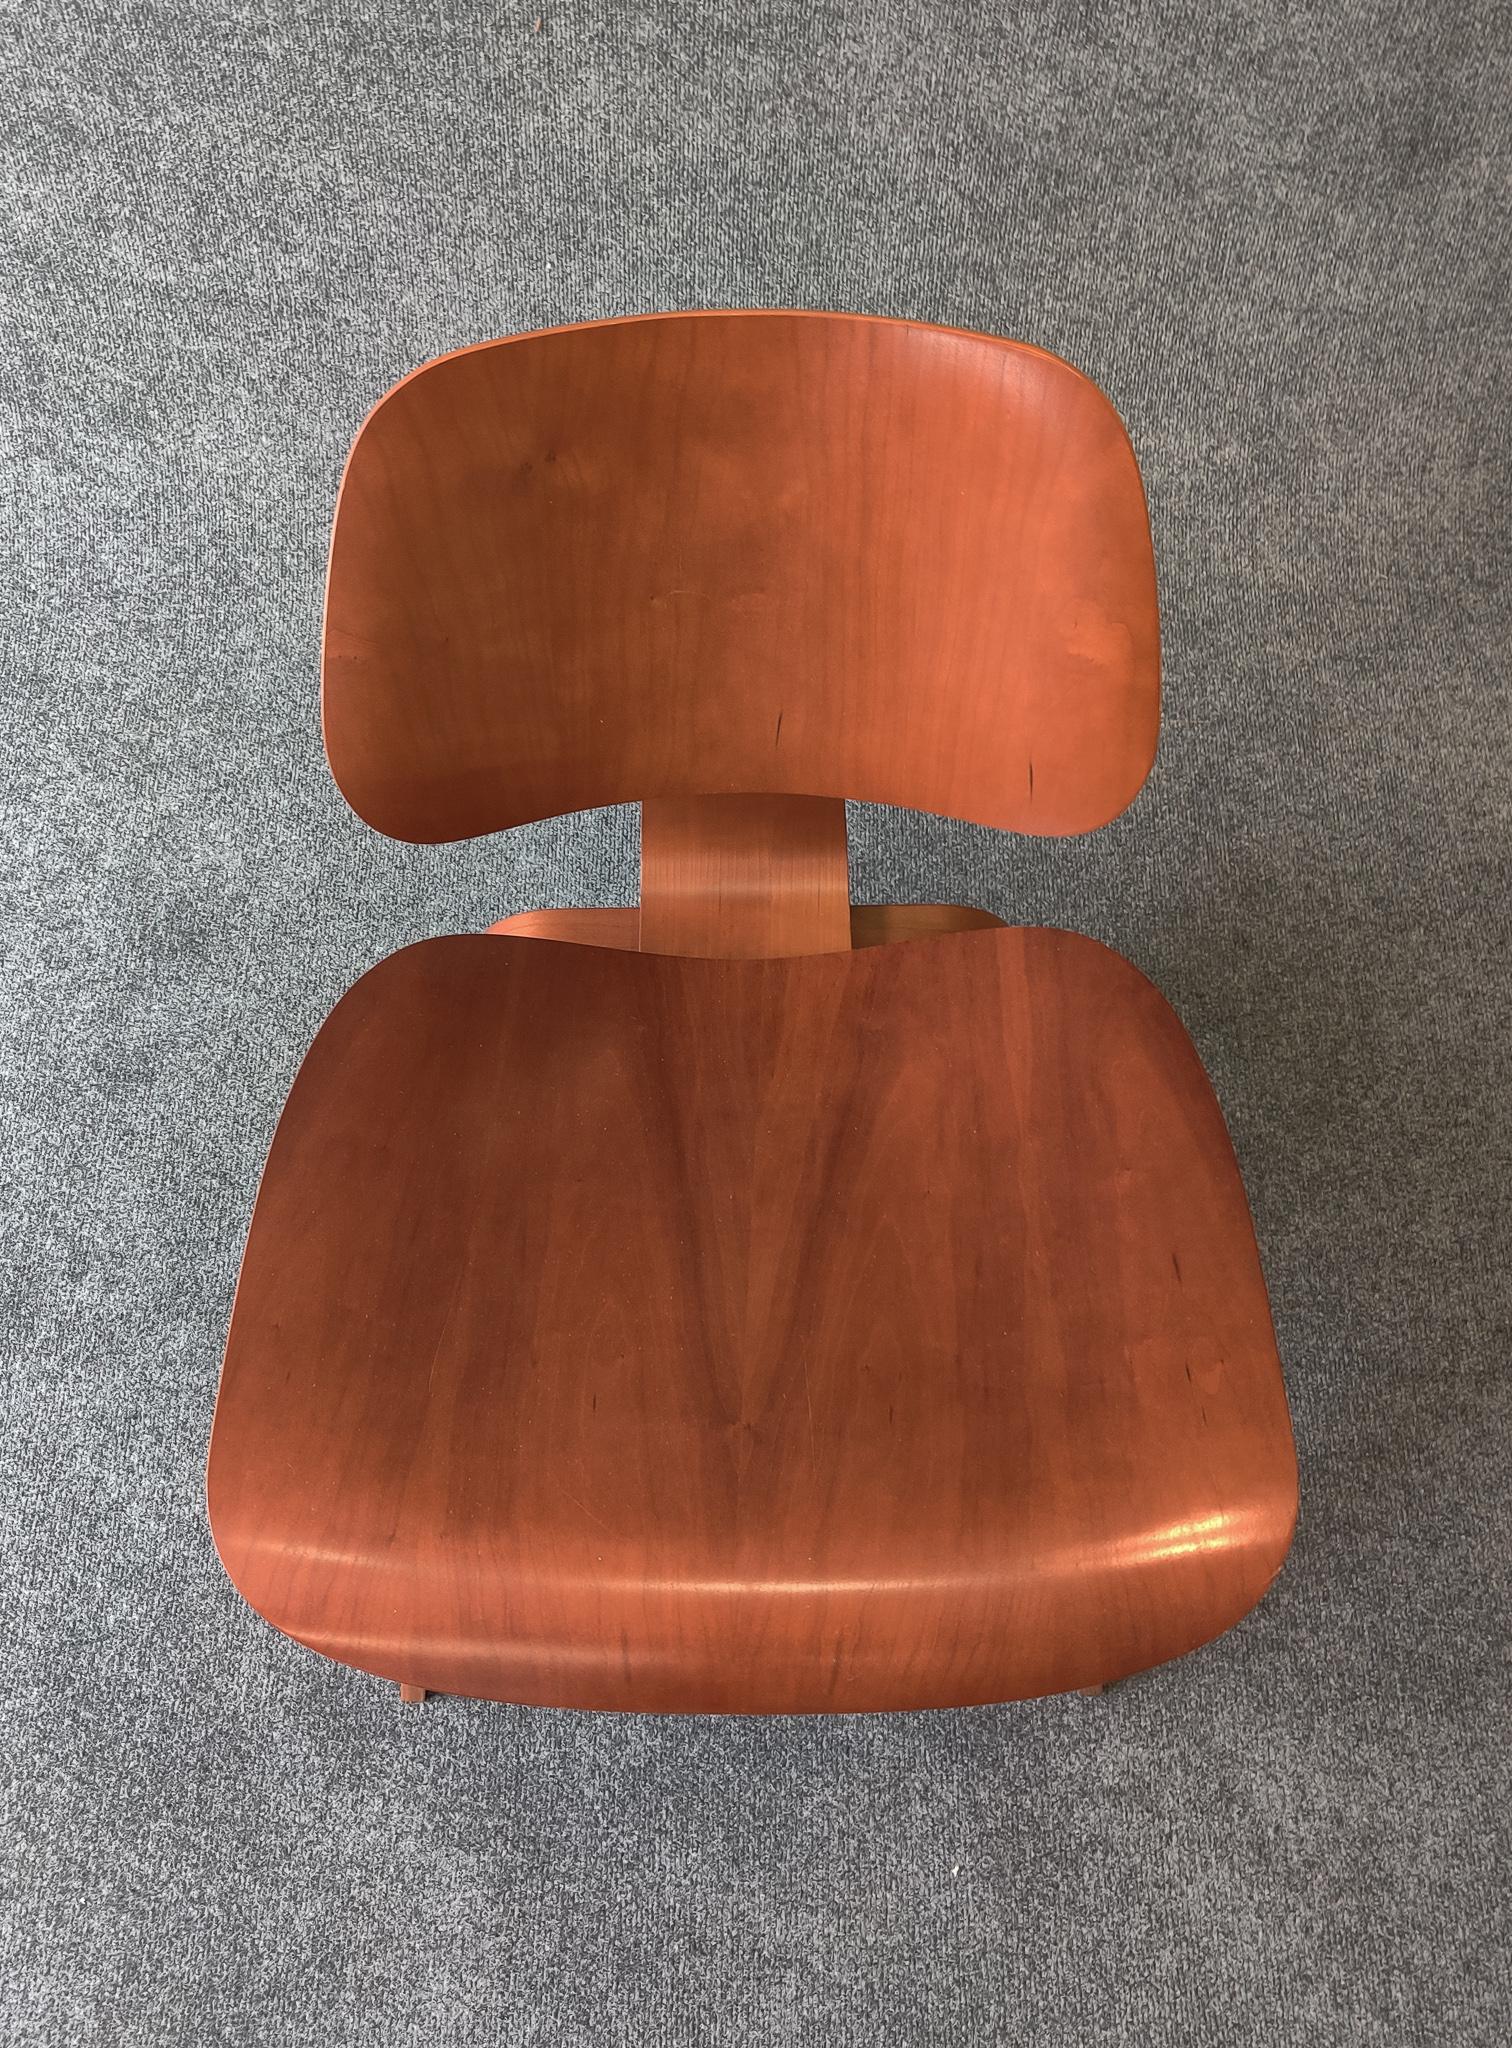 Mid-Century Modern Charles & Ray Eames Herman Miller Cherry LCW Lounge Chair Wood 2005 Great Cond!